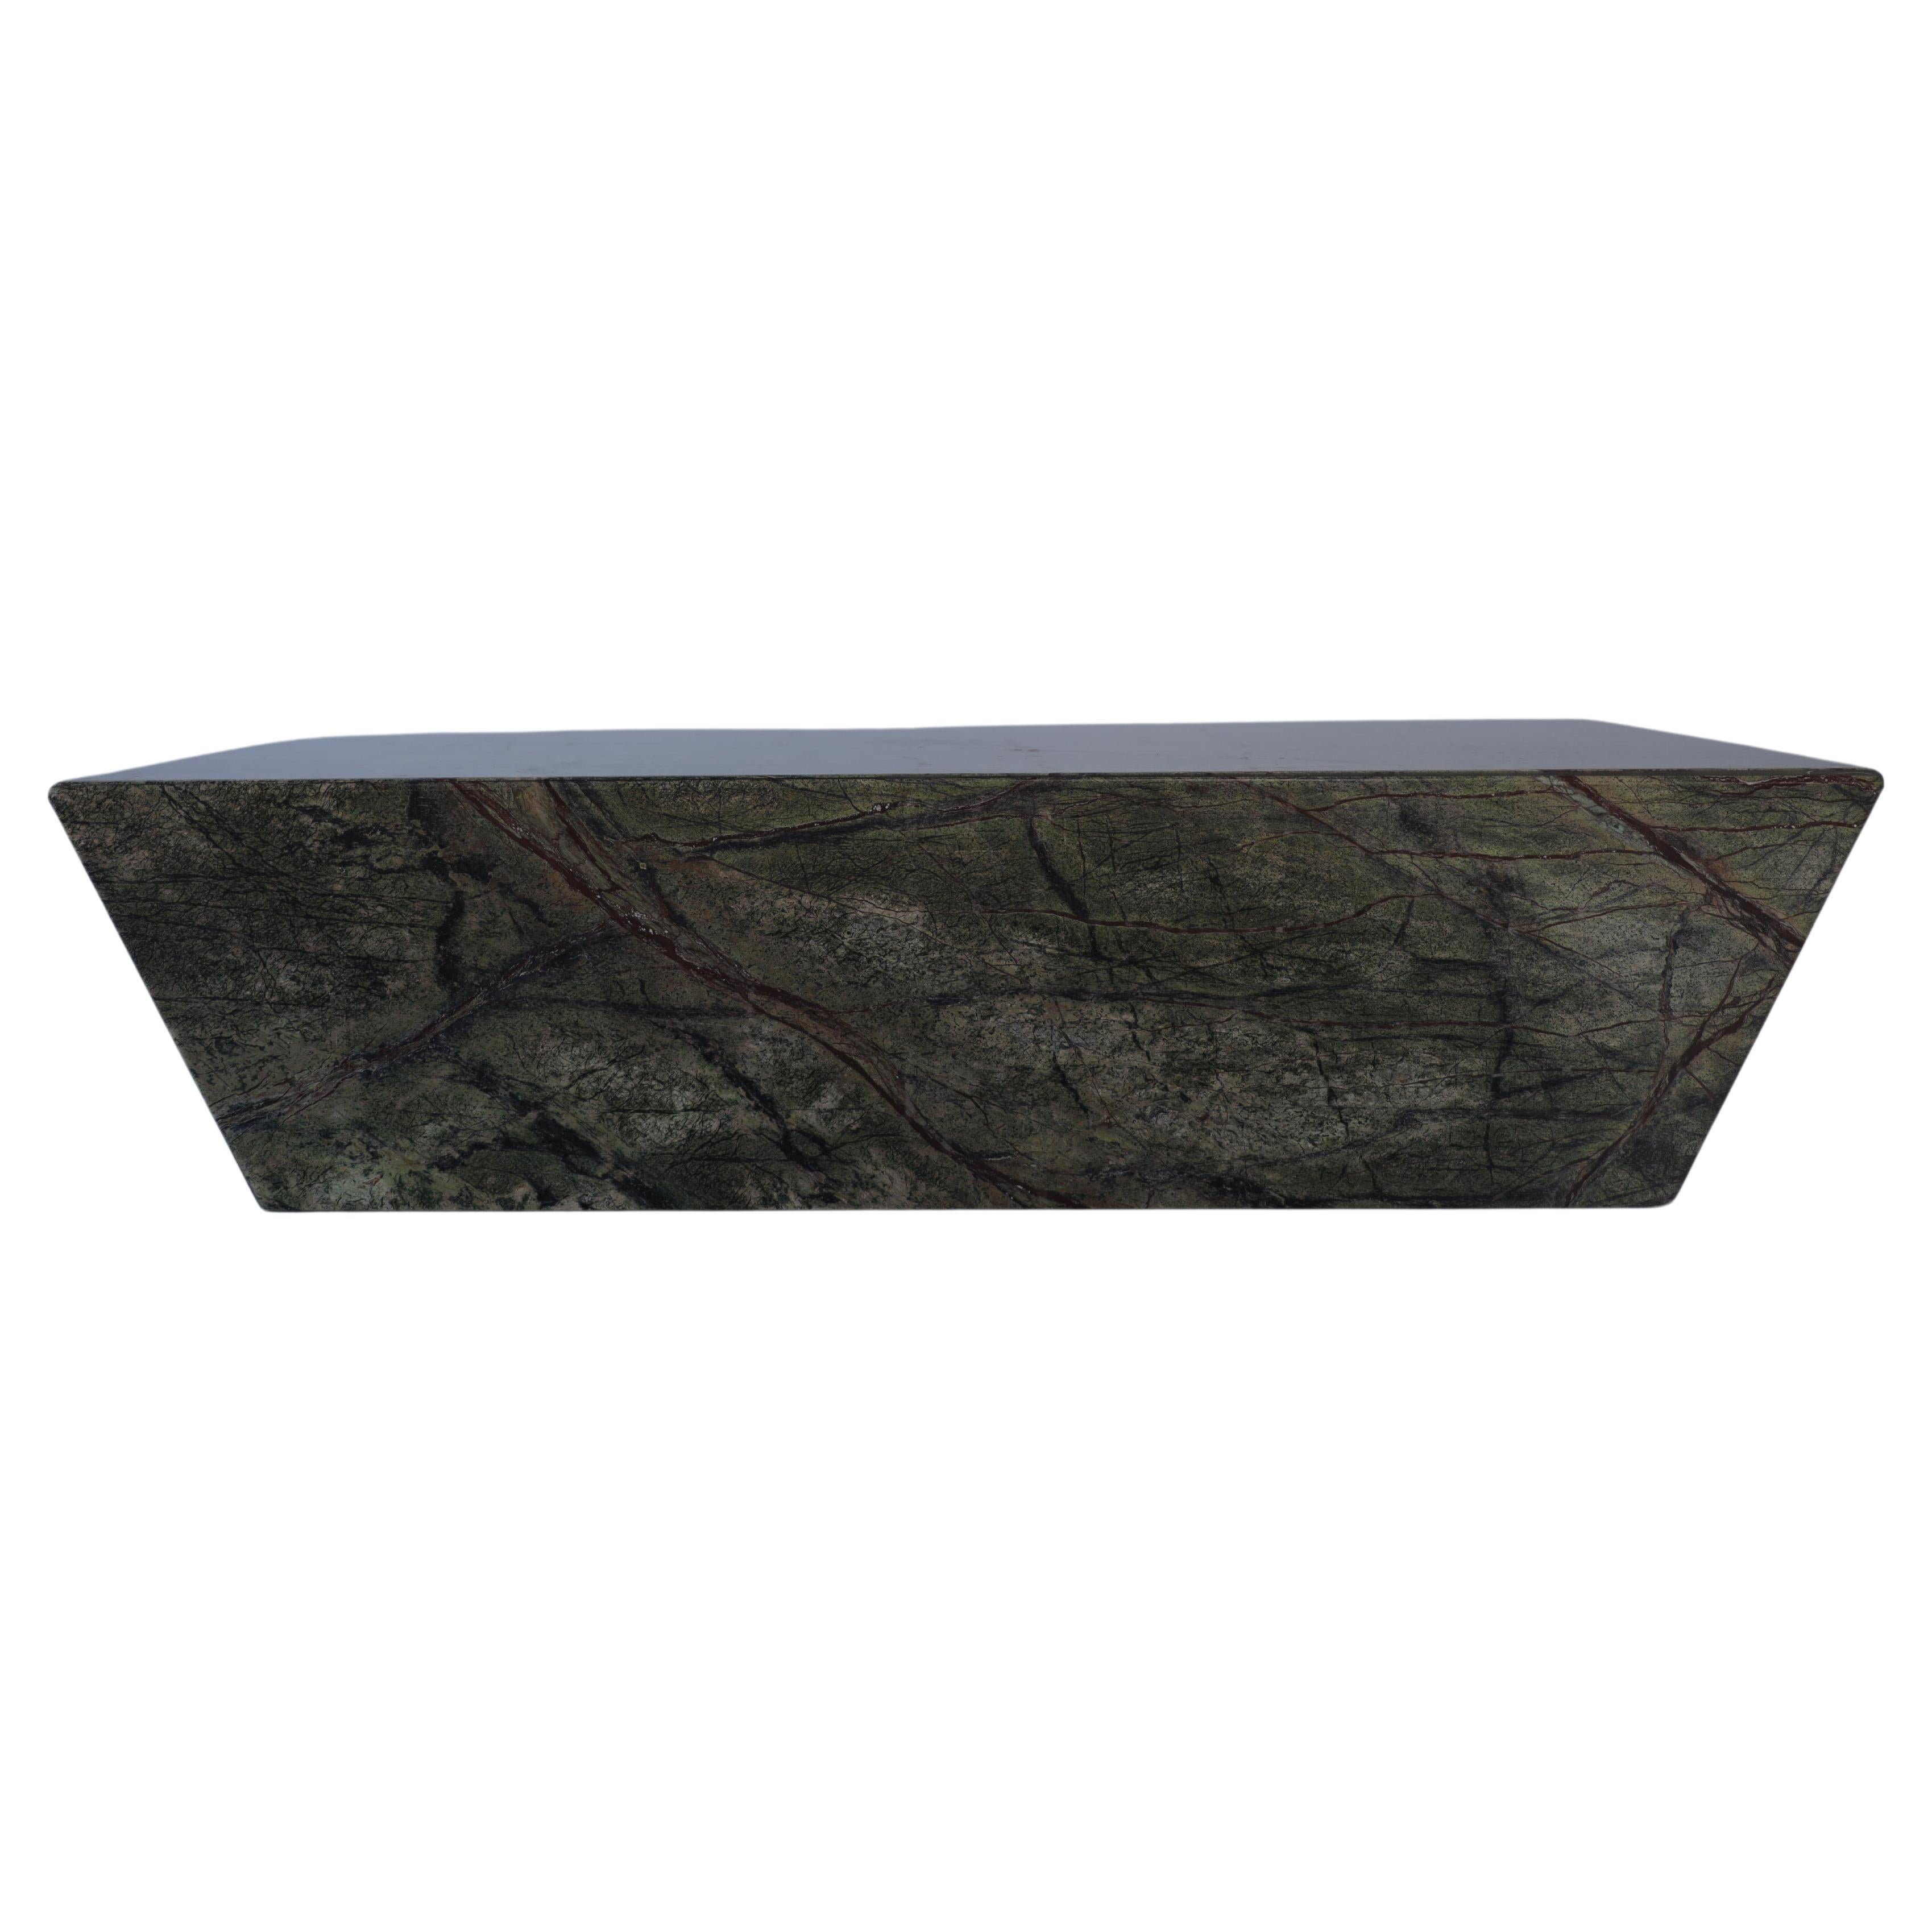 Immerse yourself in the rich beauty of nature with our Forest Green Marble Coffee Table, quarried in India. Handcrafted to perfection, this exquisite piece of furniture brings the serenity and grandeur of India's lush landscapes into your living